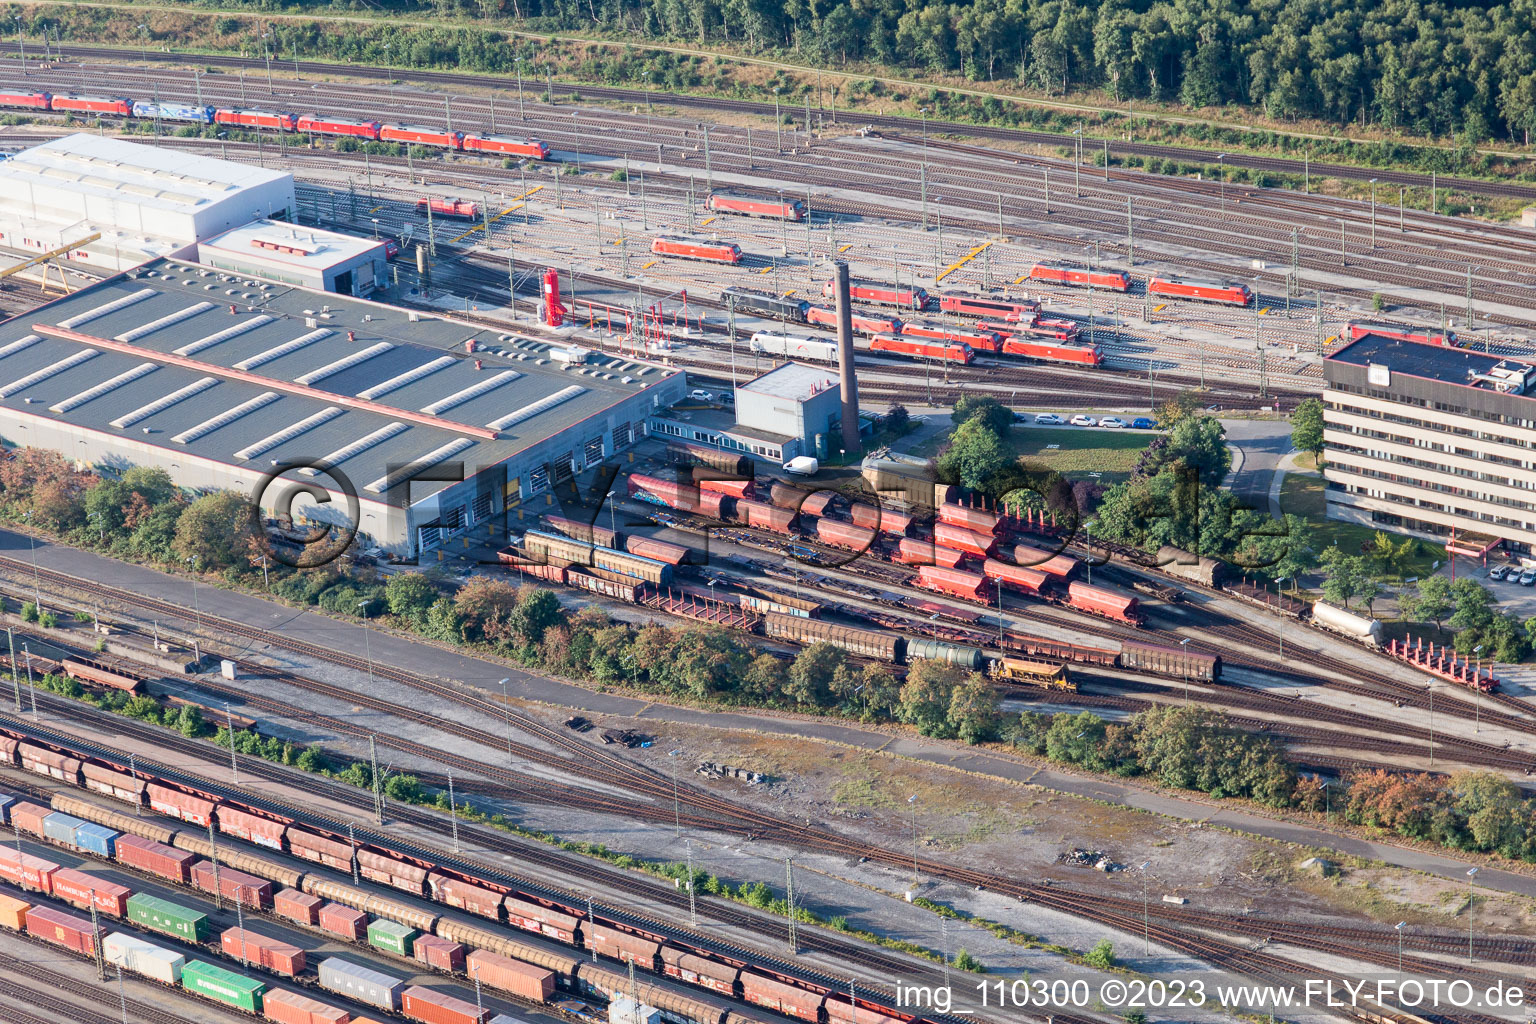 Drone recording of Marshalling yard and freight station Maschen of the Deutsche Bahn in the district Maschen in Seevetal in the state Lower Saxony, Germany